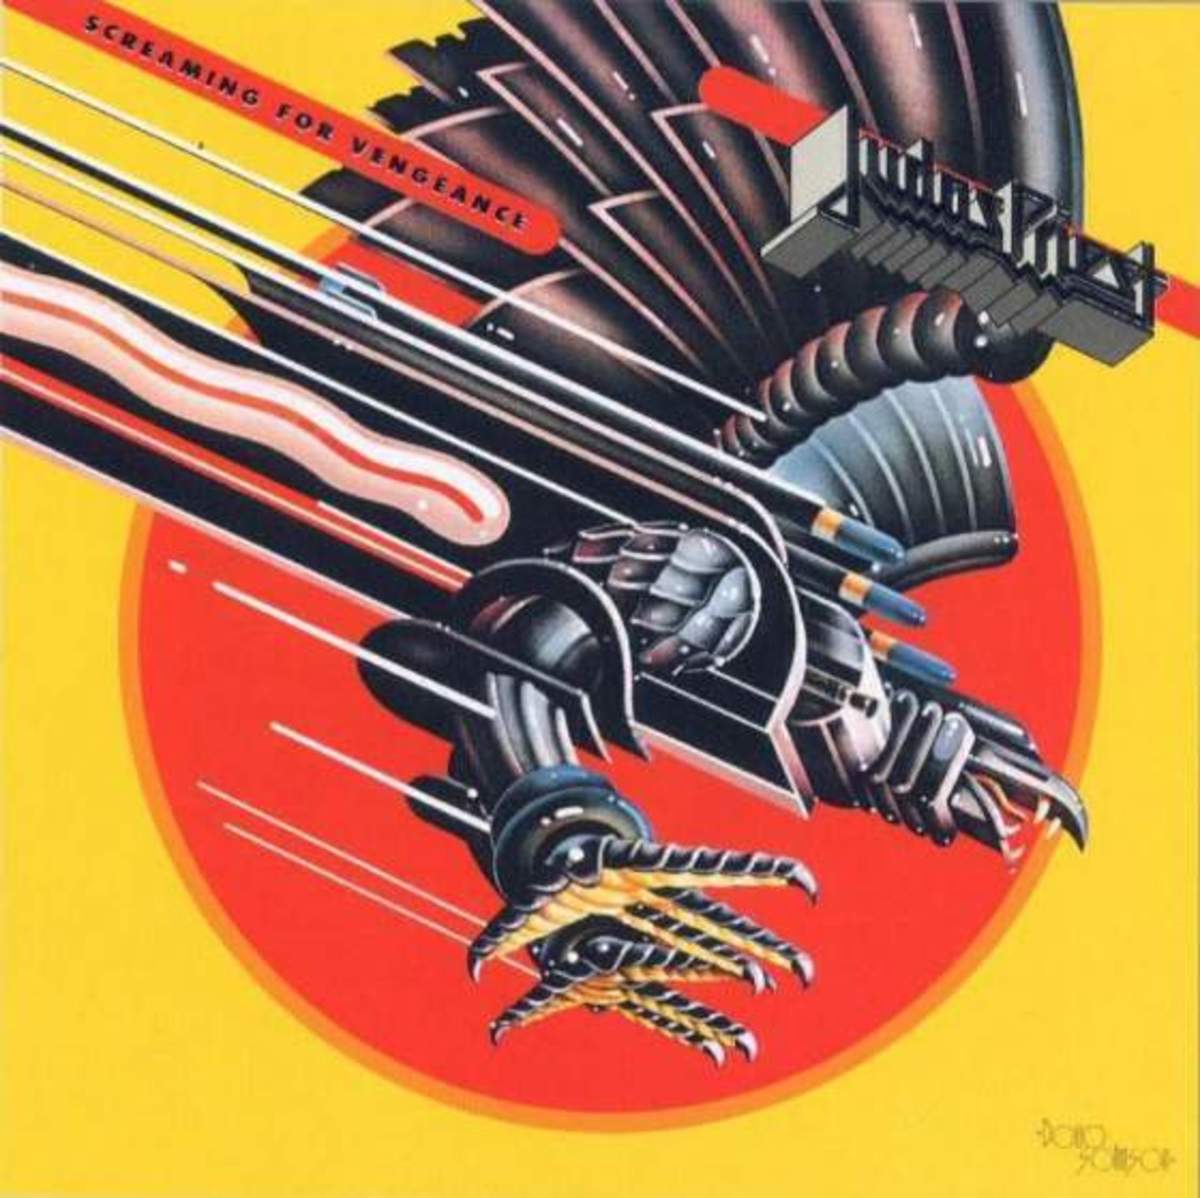 review-screaming-for-vengeance-by-the-heavy-metal-band-judas-priest